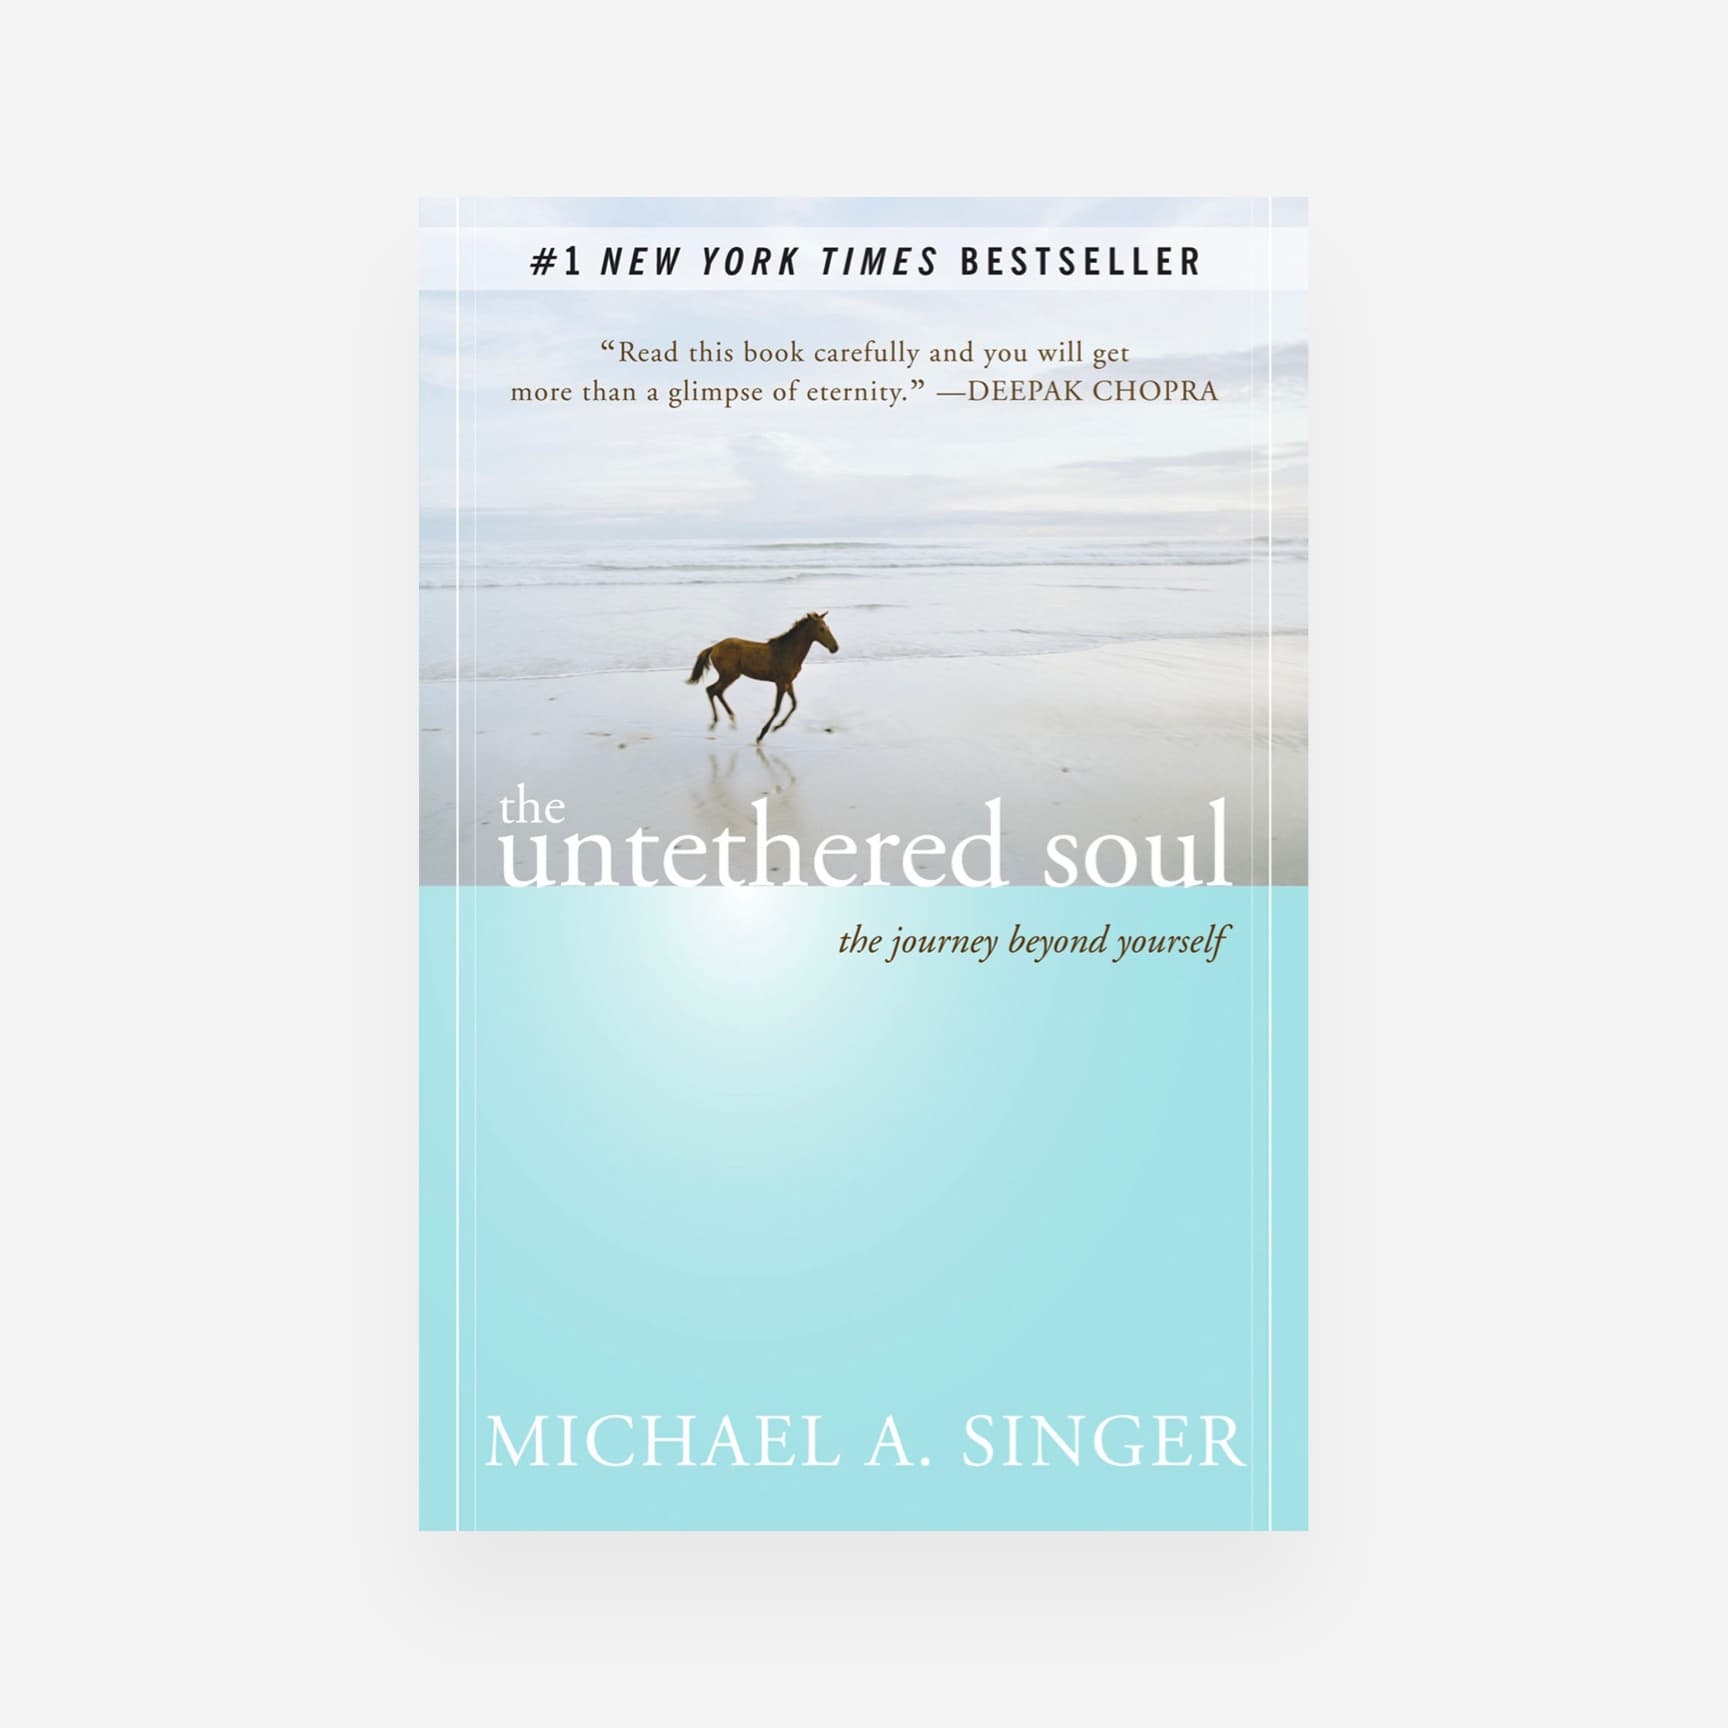 The Untethered Soul in the Philippines